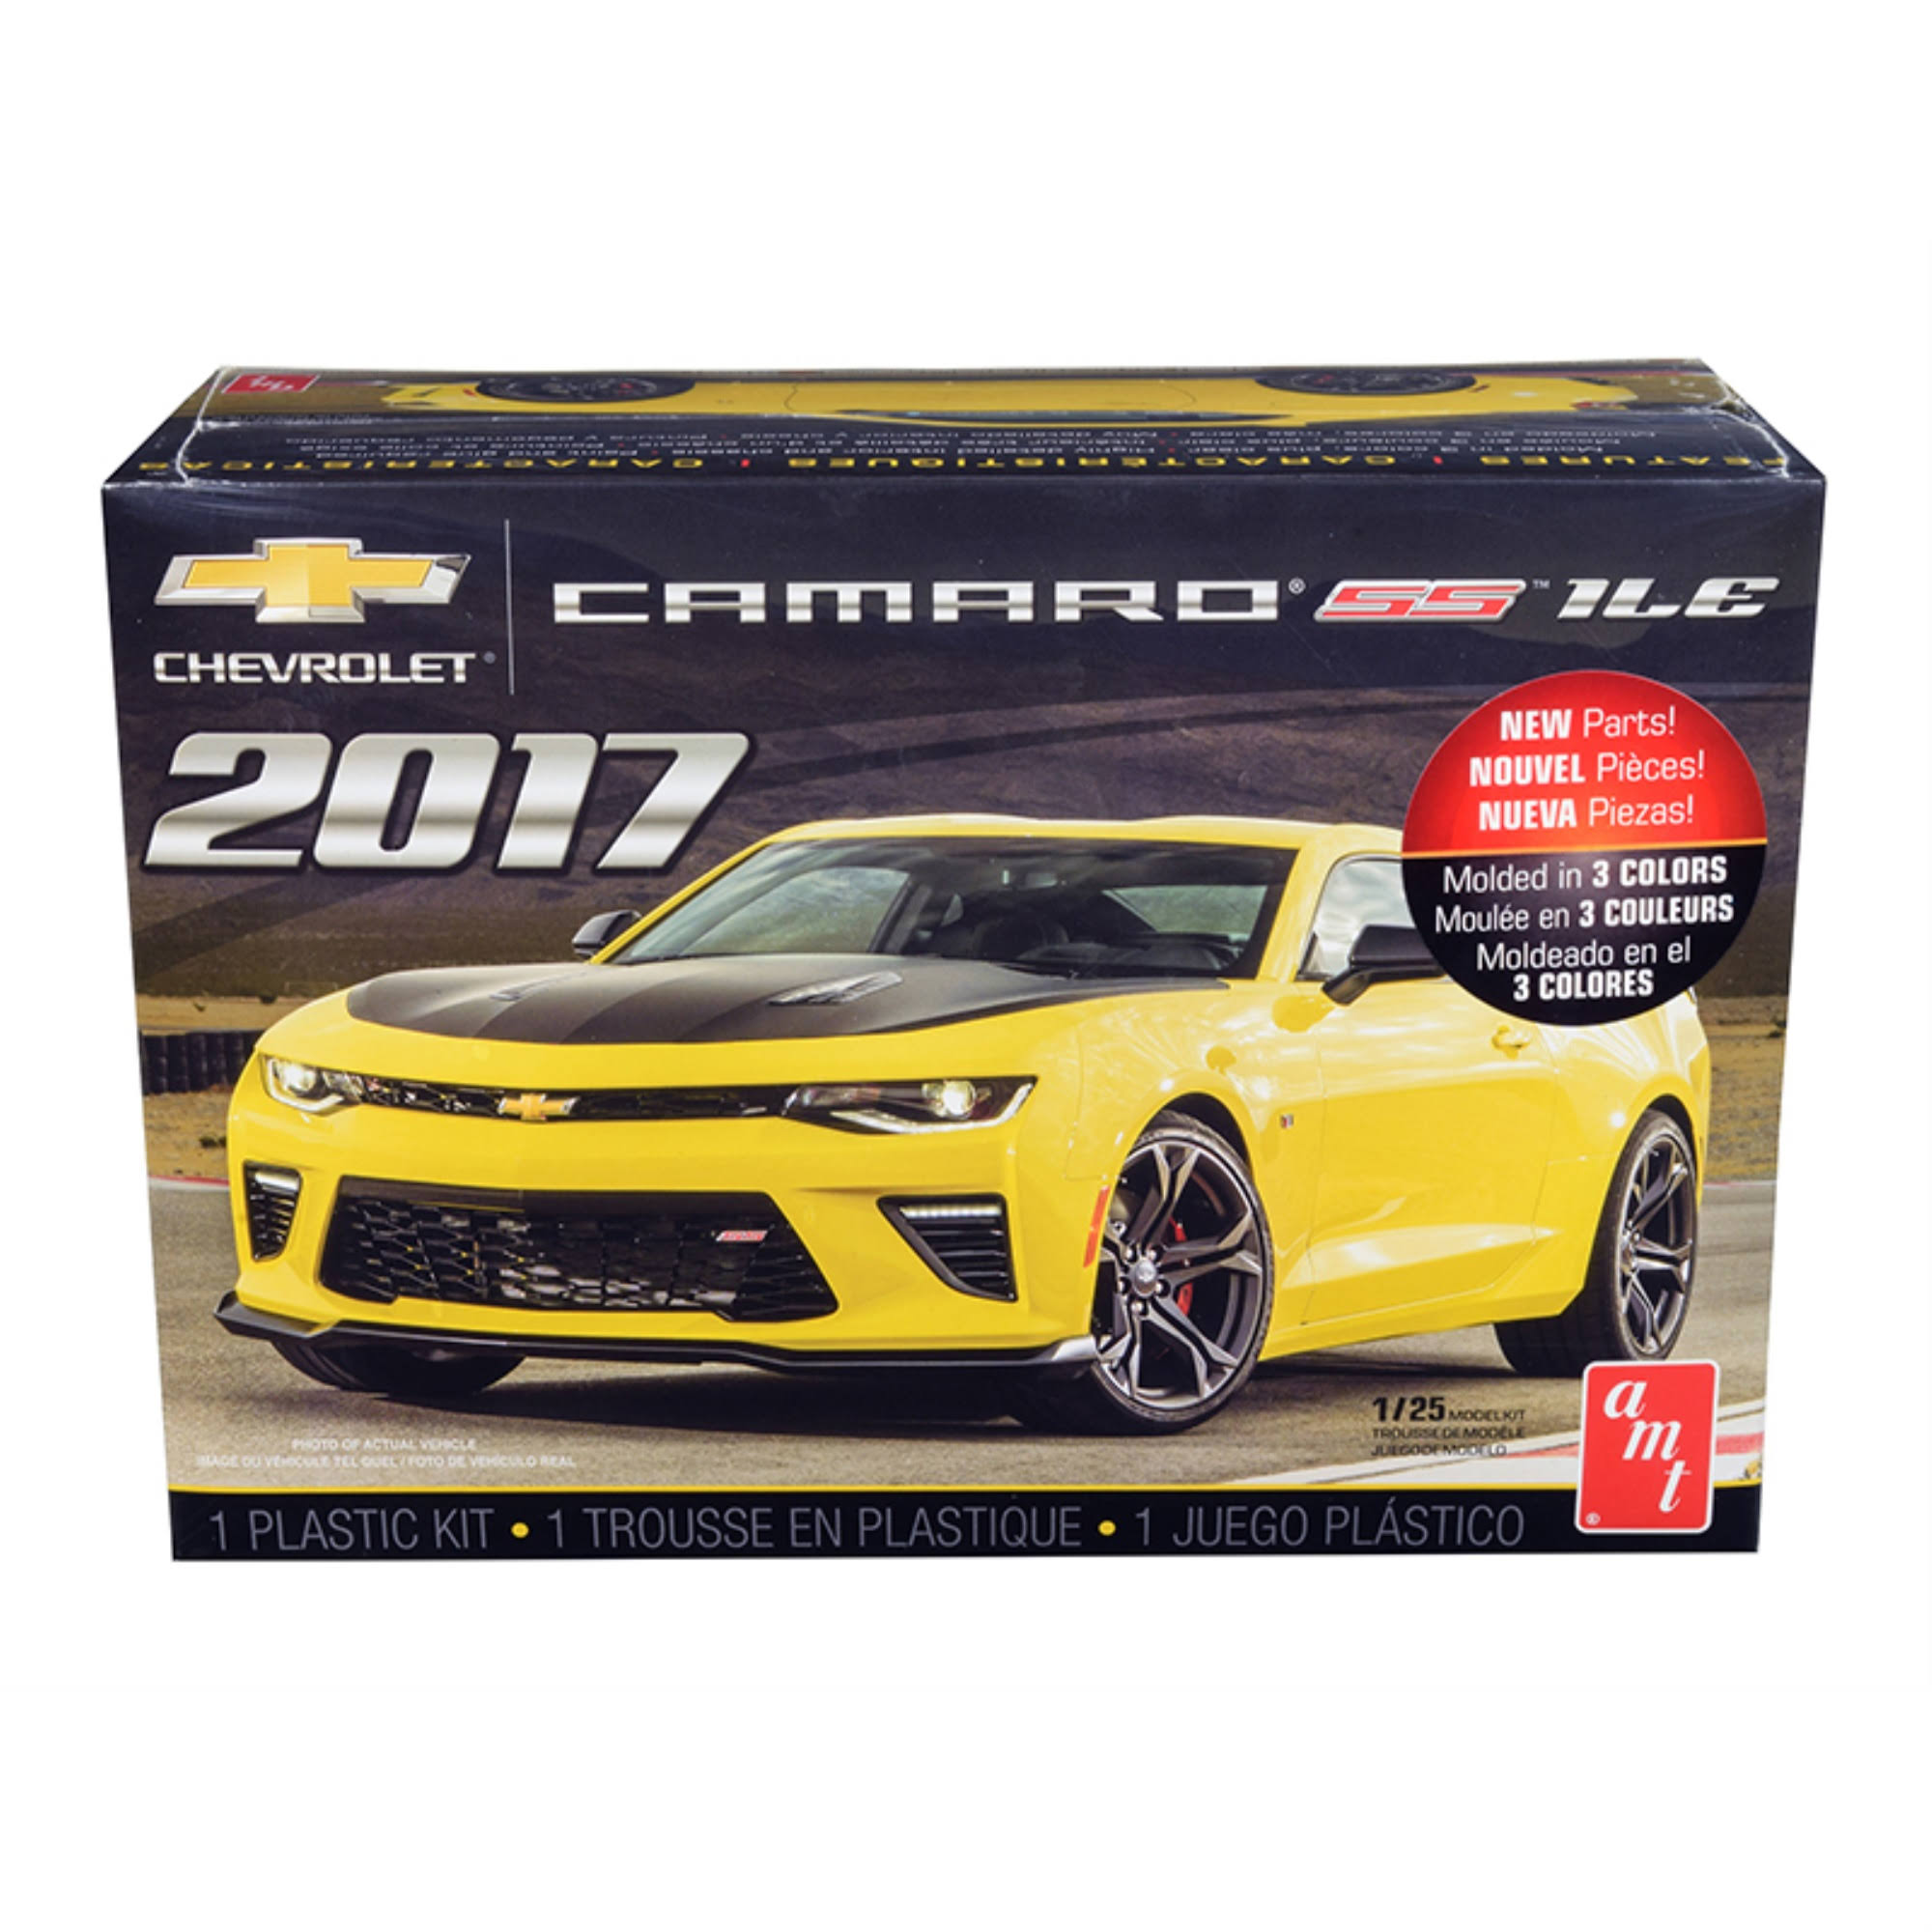 AMT Amtamt1074m Scale Vehicle Car Model Toy Kit - Chevy Camaro SS 1LE